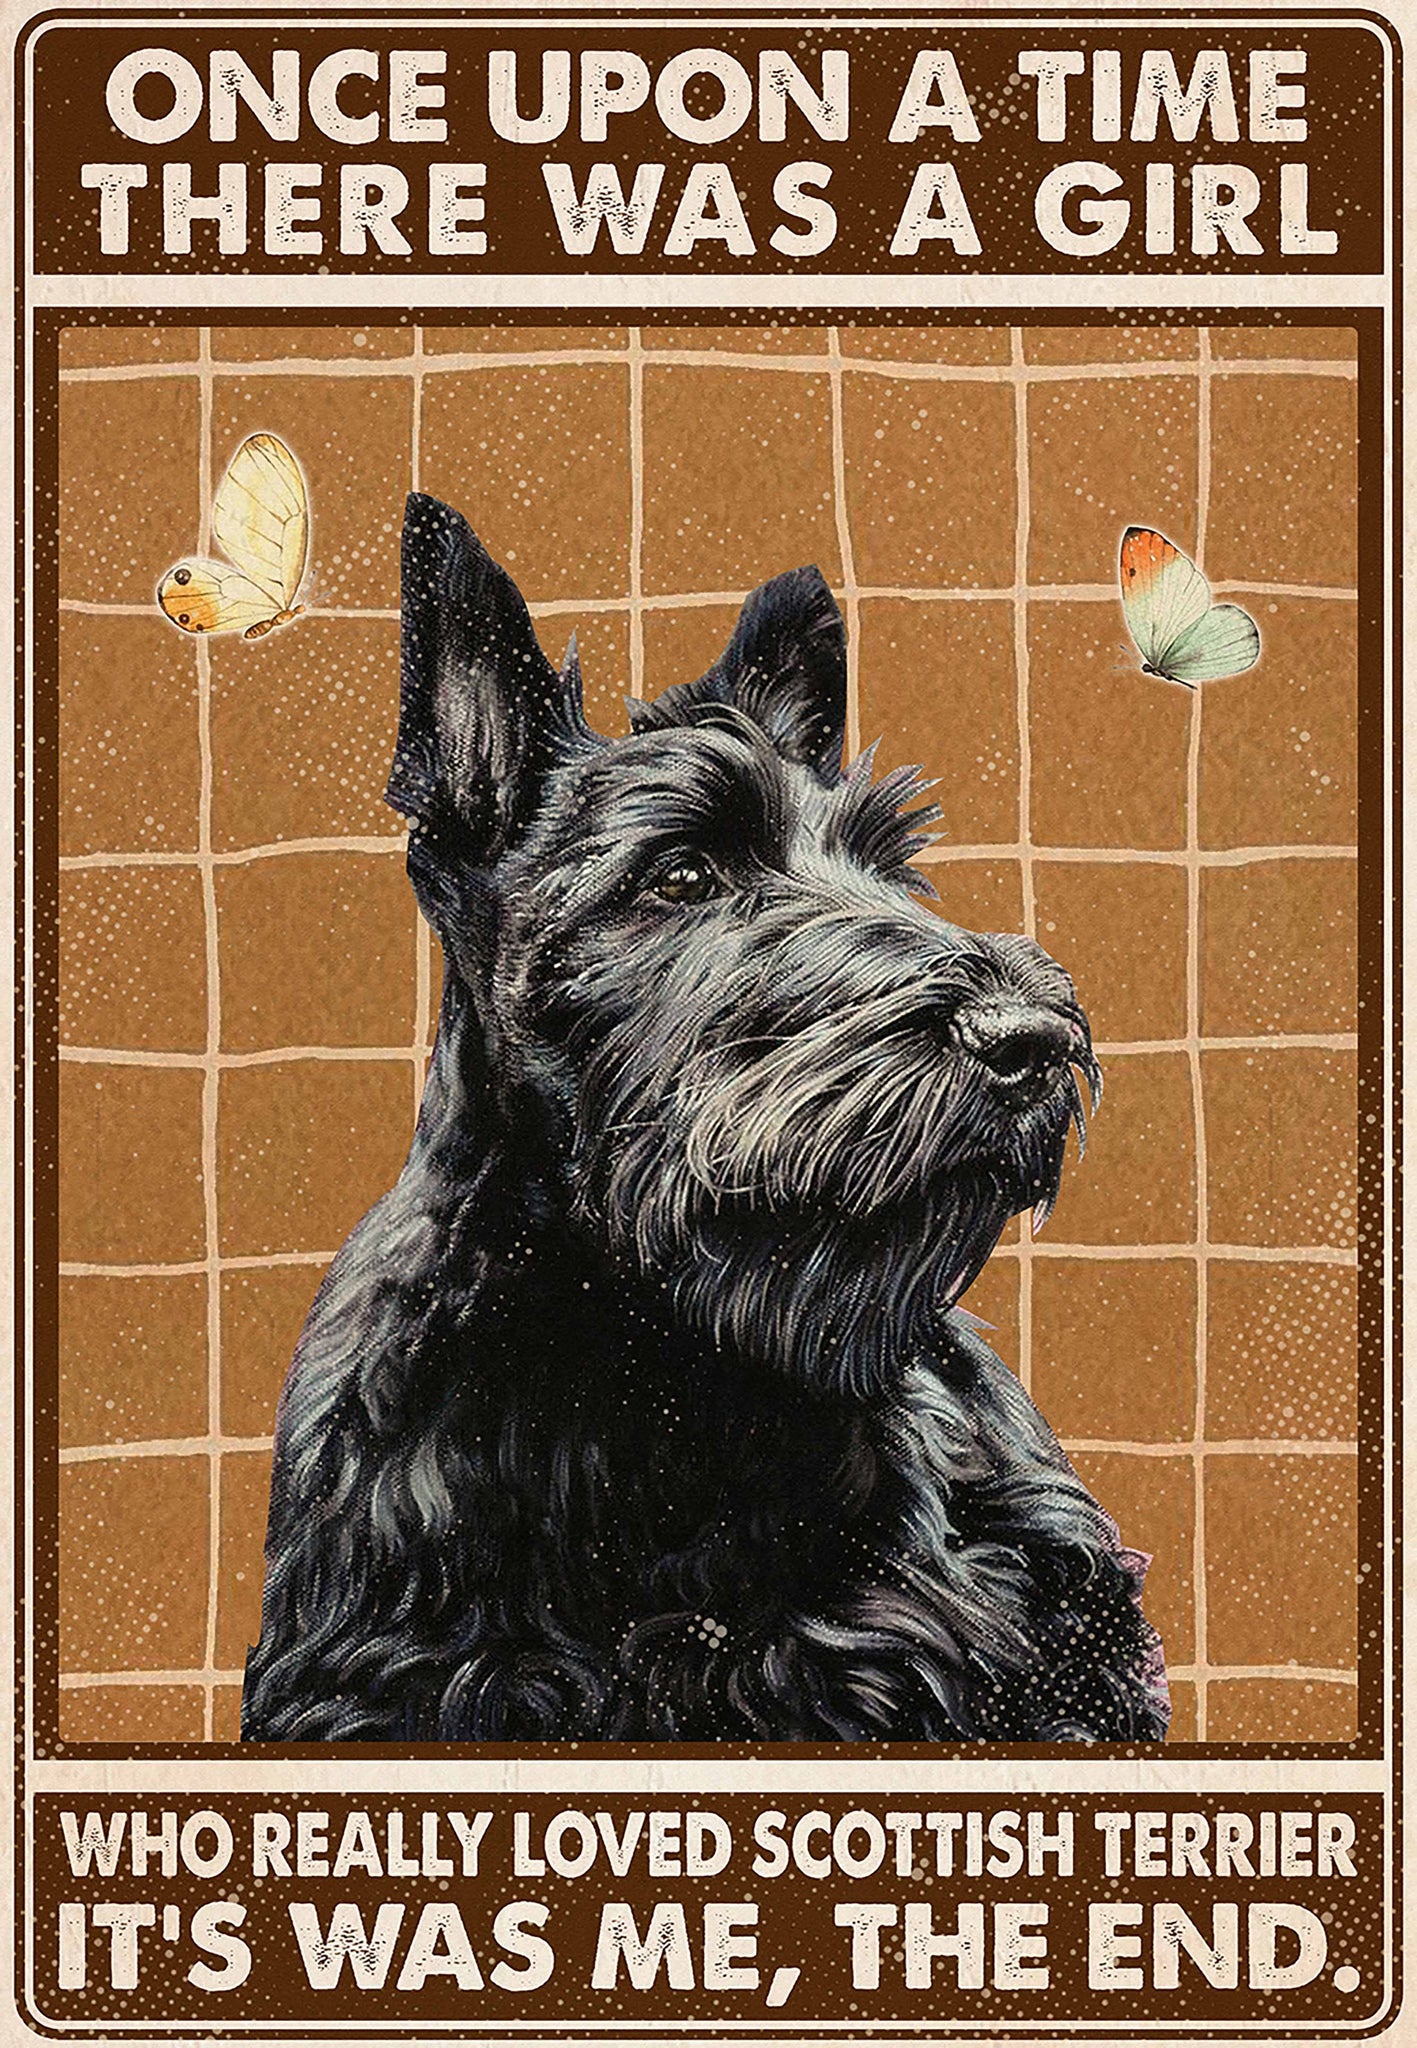 Scottish Terrier - Really Loved Beagle It Was Me The End-MH1008